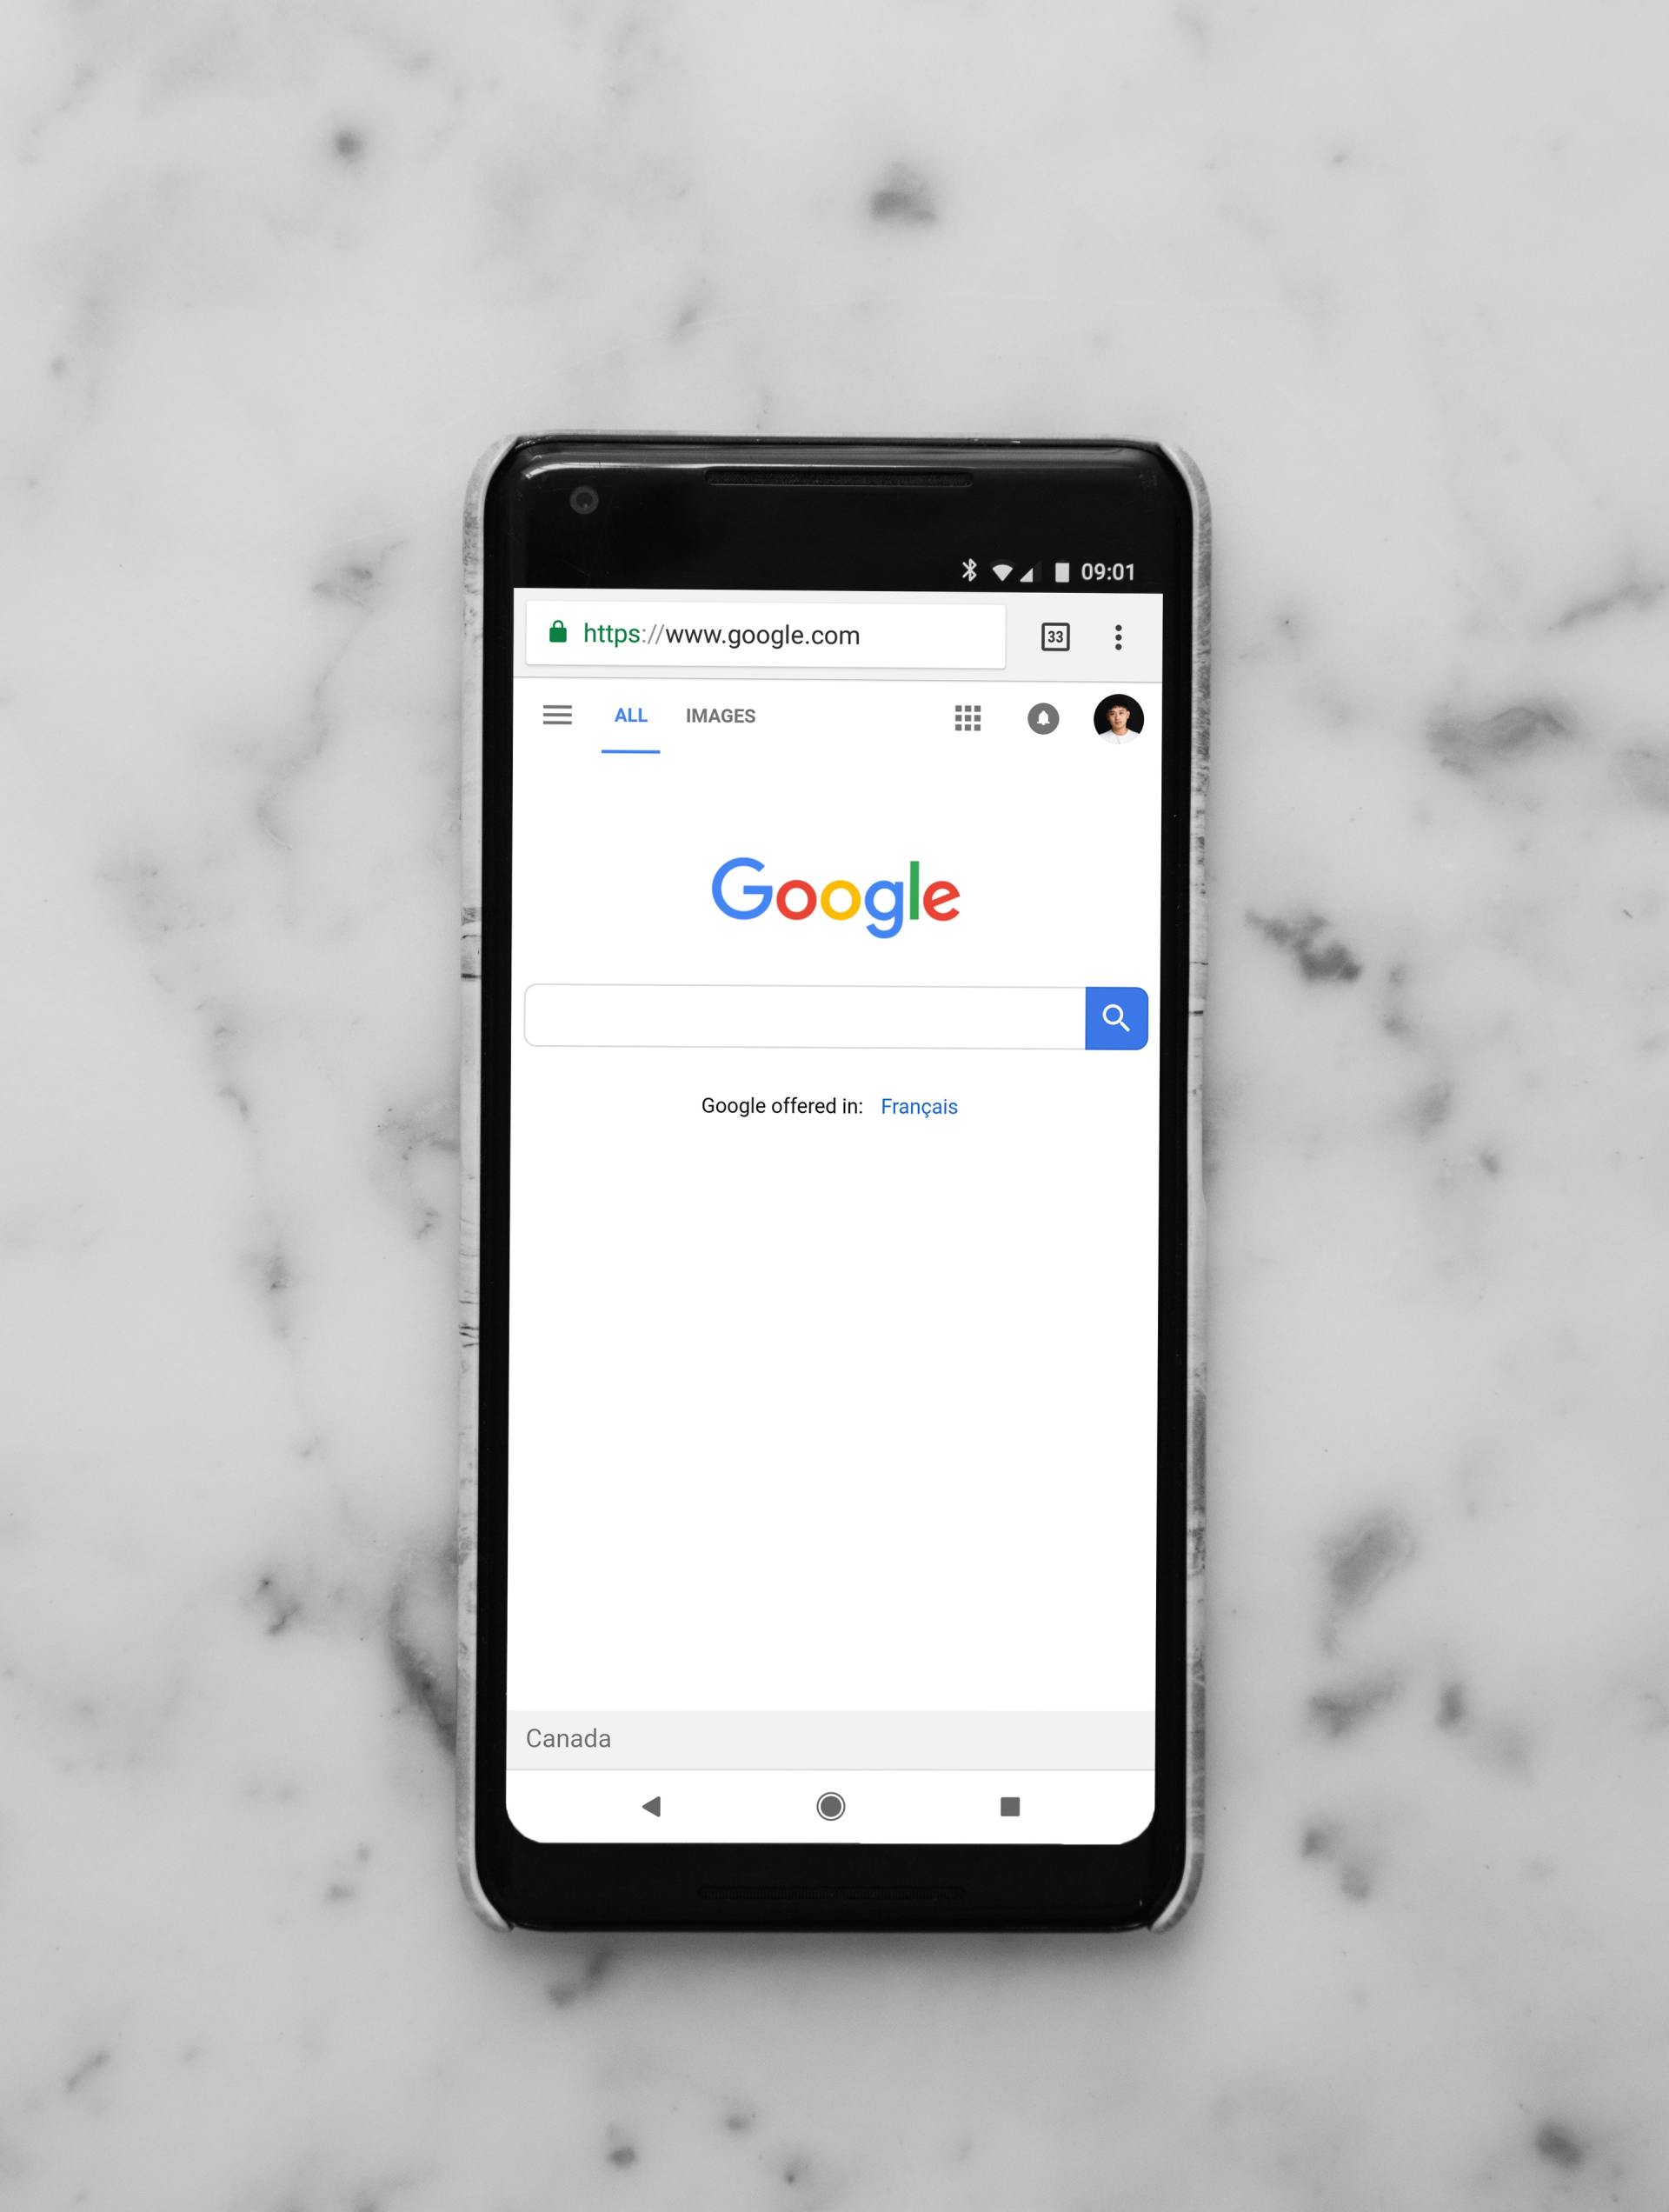 A mobile phone with Google screen